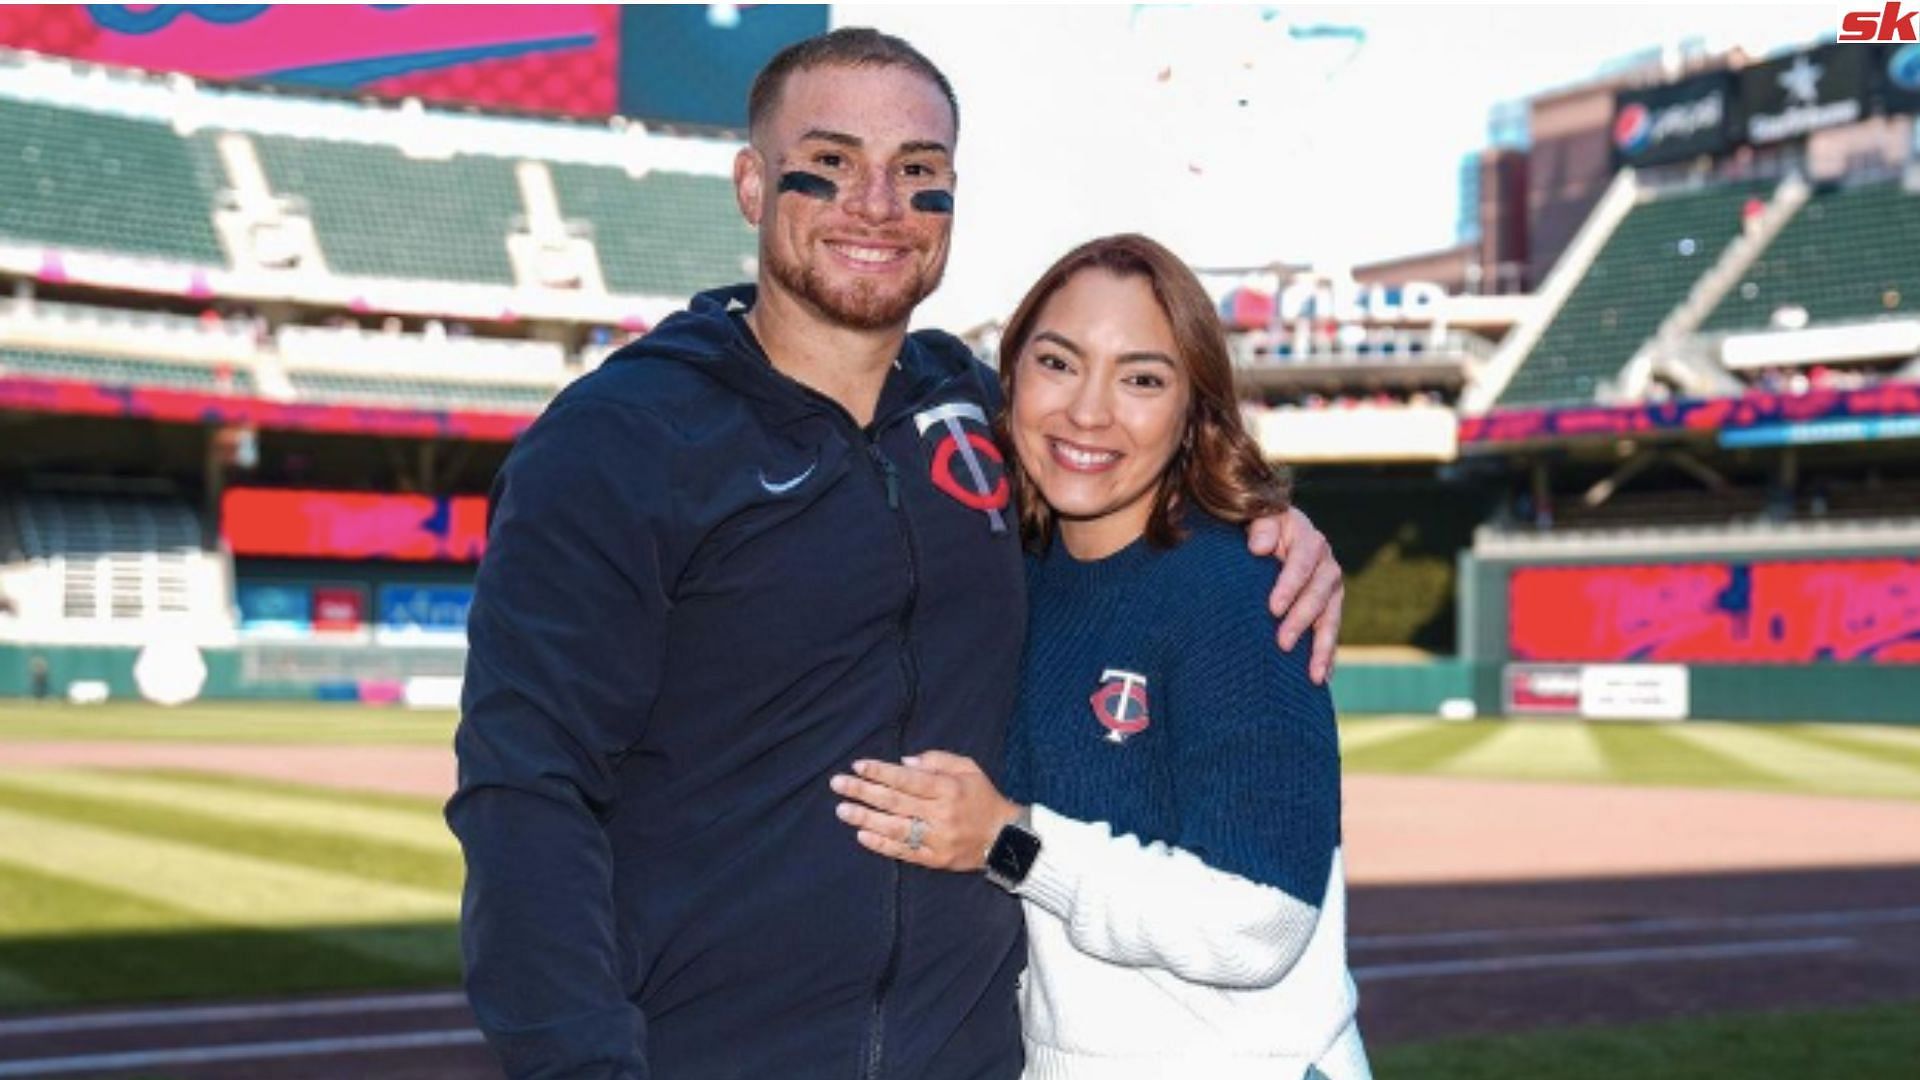 Who is Christian Vazquez's wife, Gabriela Otero? A glimpse into the  personal life of Twins catcher